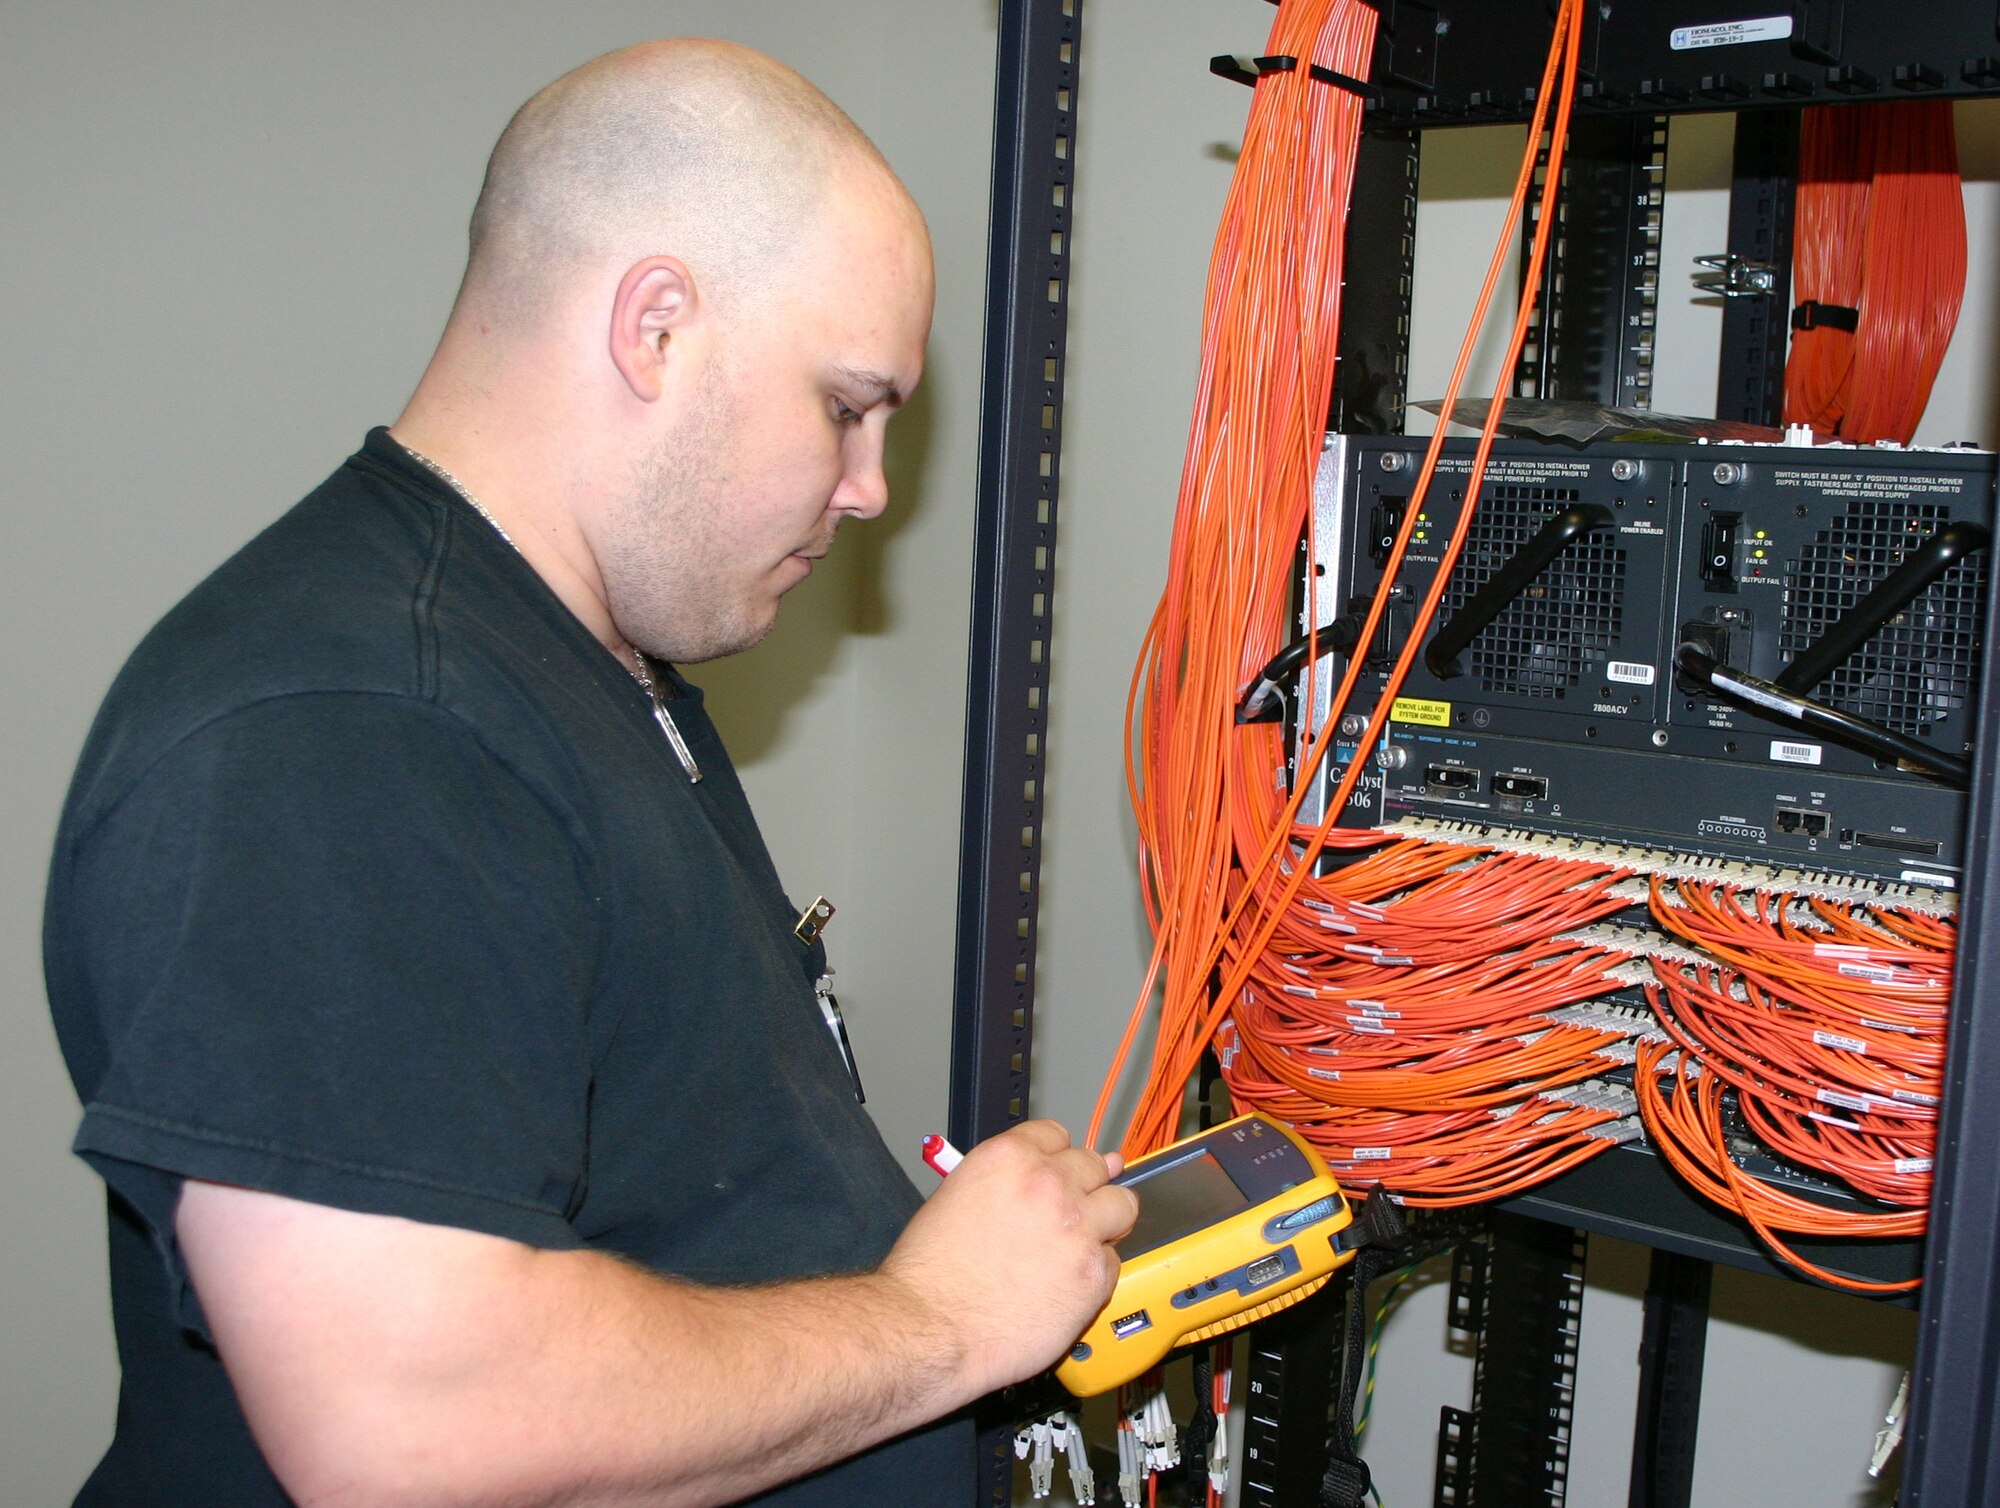 Gregory Campbell, a network data communication analyst at the Air Force Personnel Center here, verifies cable ports for the new operation center's network switch.  The switch's components feed down from a secure server and will give AEF workers secure lines once the operation center is fully operational.  Since November 2007, more than 12,000 feet of combined fiber optic and copper cables have been placed in the new center. (U.S. Air Force photo/Richard Salomon)